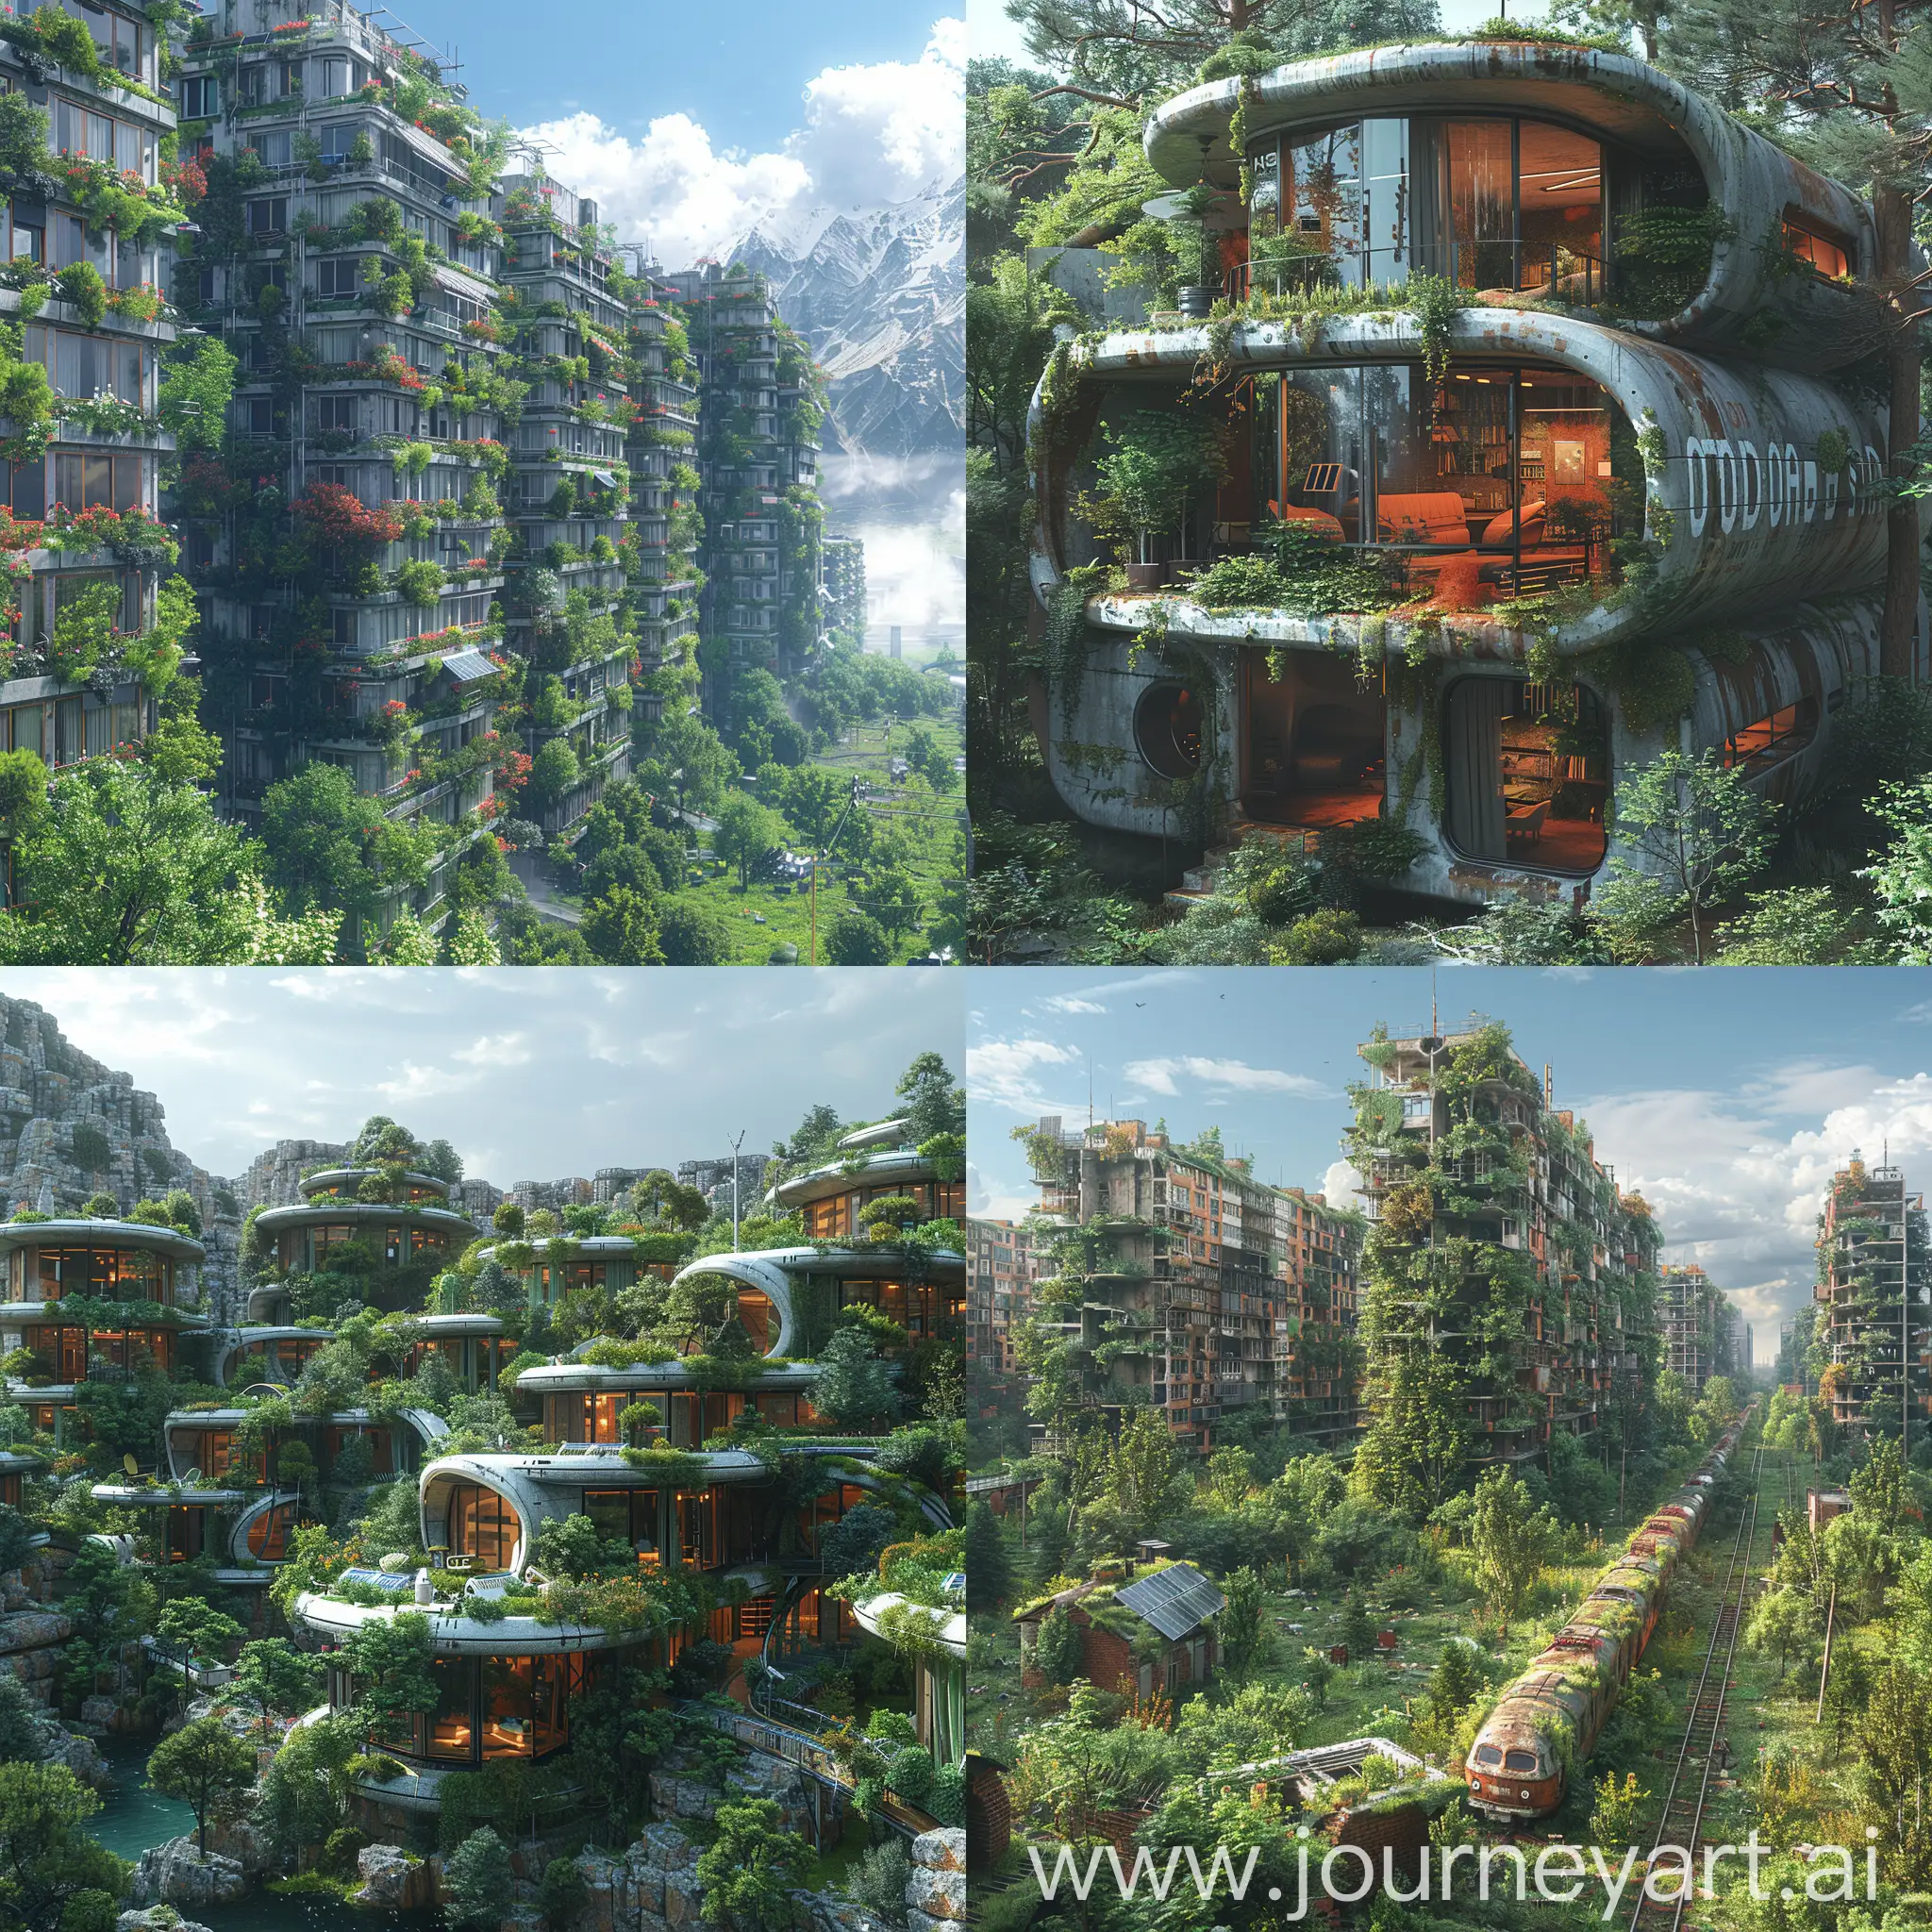 Ultramodern, futuristic Pripyat, Phytoremediation, Vertical Forests, Green Roofs, Waste-to-Energy Plants, Sustainable Transportation, Smart Grid, Solar Panels, Wind Turbines, Geothermal Energy, Hydropower, Biomass Energy, Biometric Security, Augmented Reality, Hyperloop Transportation, 3D Printing, Smart Homes, octane render --stylize 1000